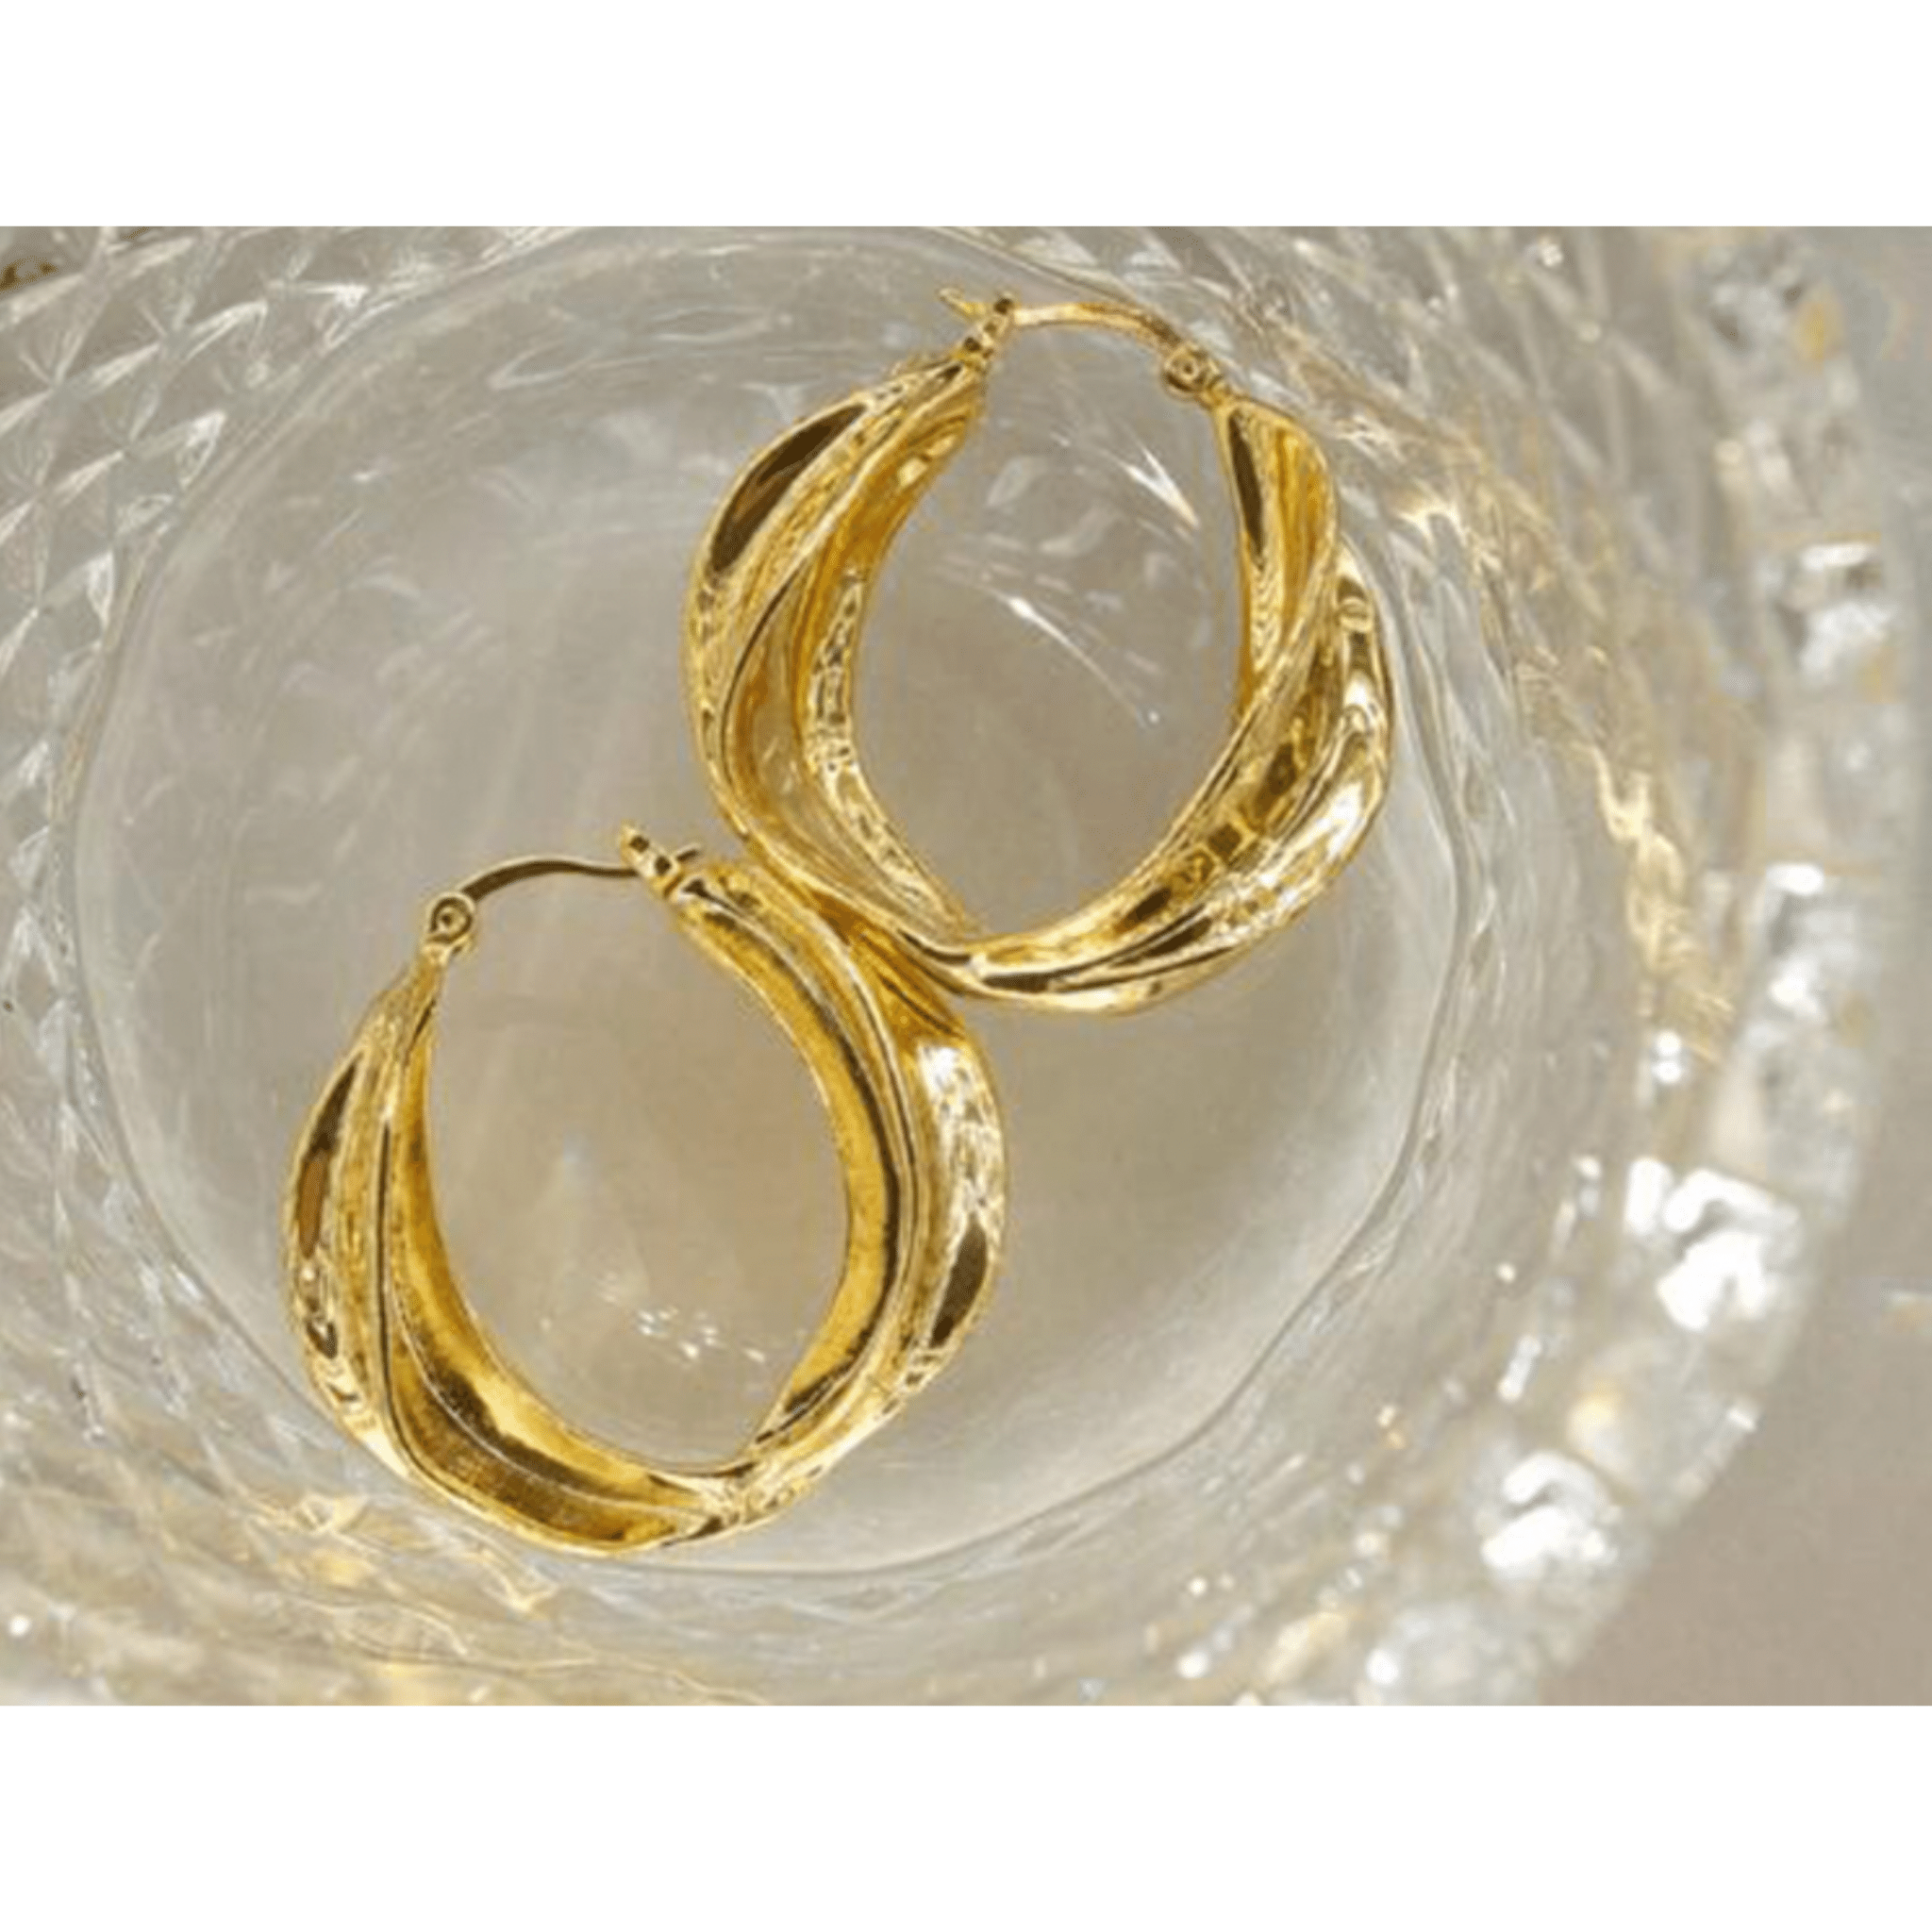 Exotic Ambition 18K Gold Plated Hoop Earrings